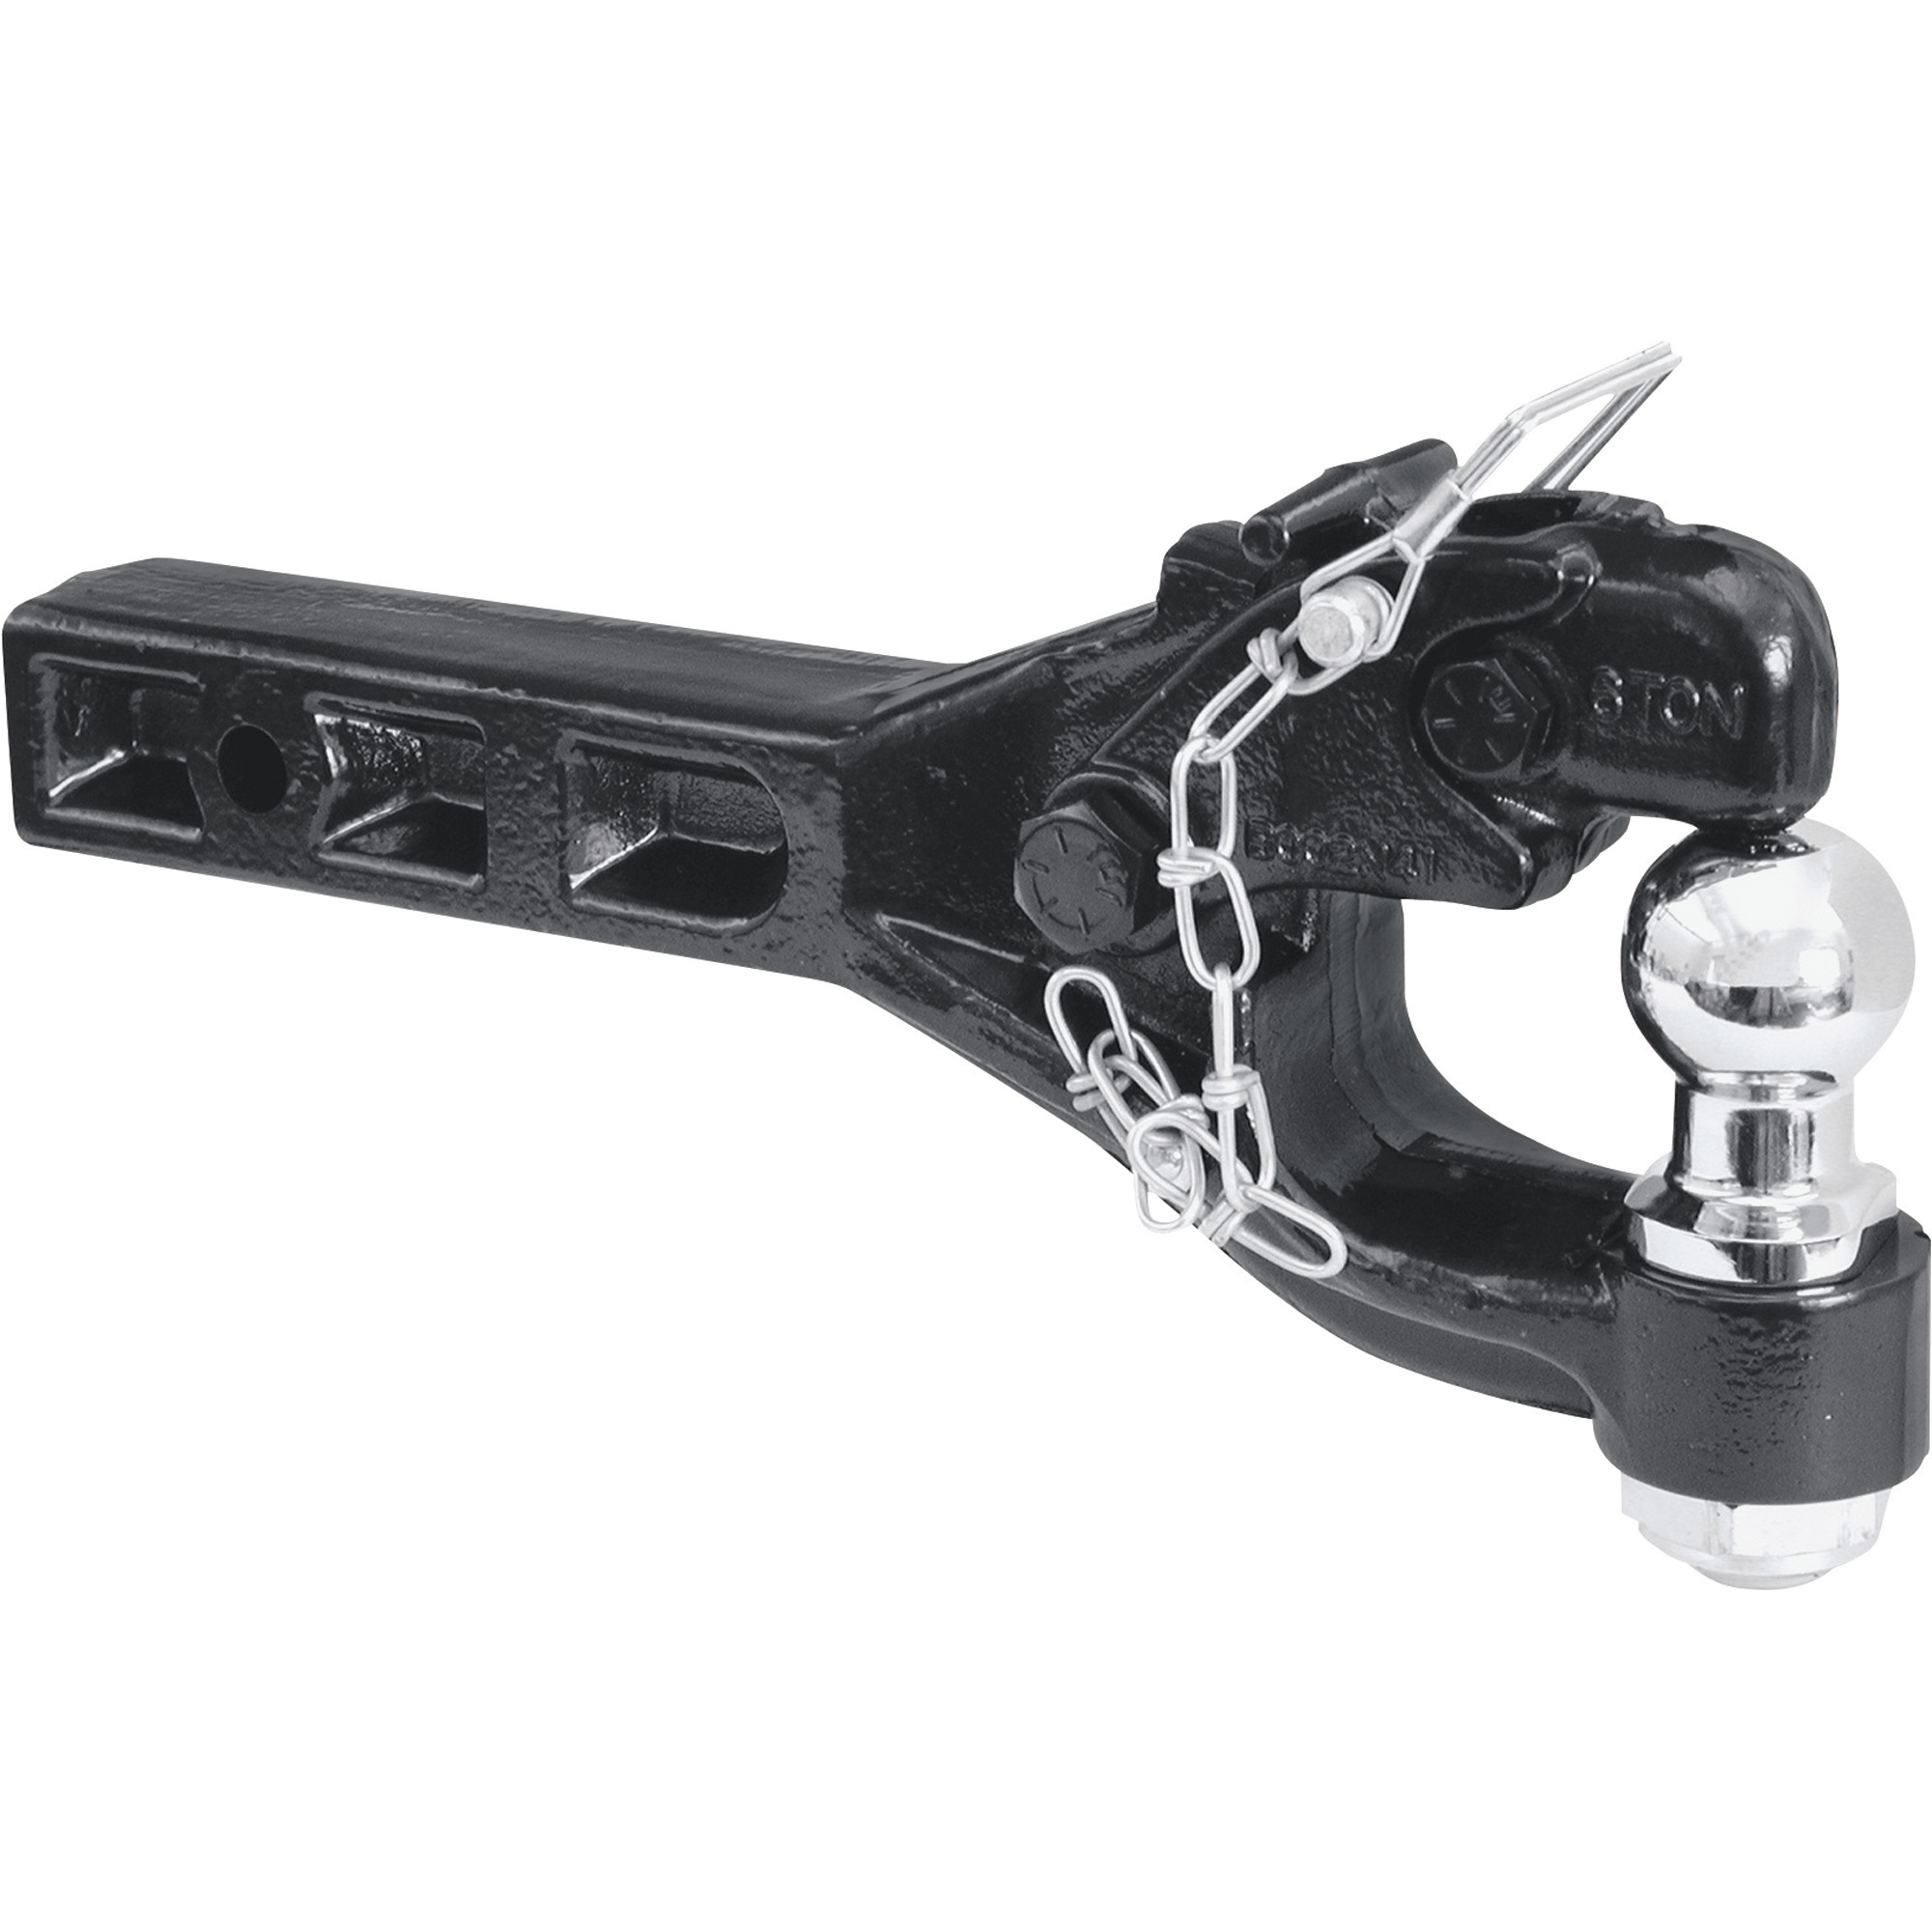 Ultra-Tow Dual-Purpose Pintle Hitch Fits 2Inch Receiver, 6-Ton Capacity